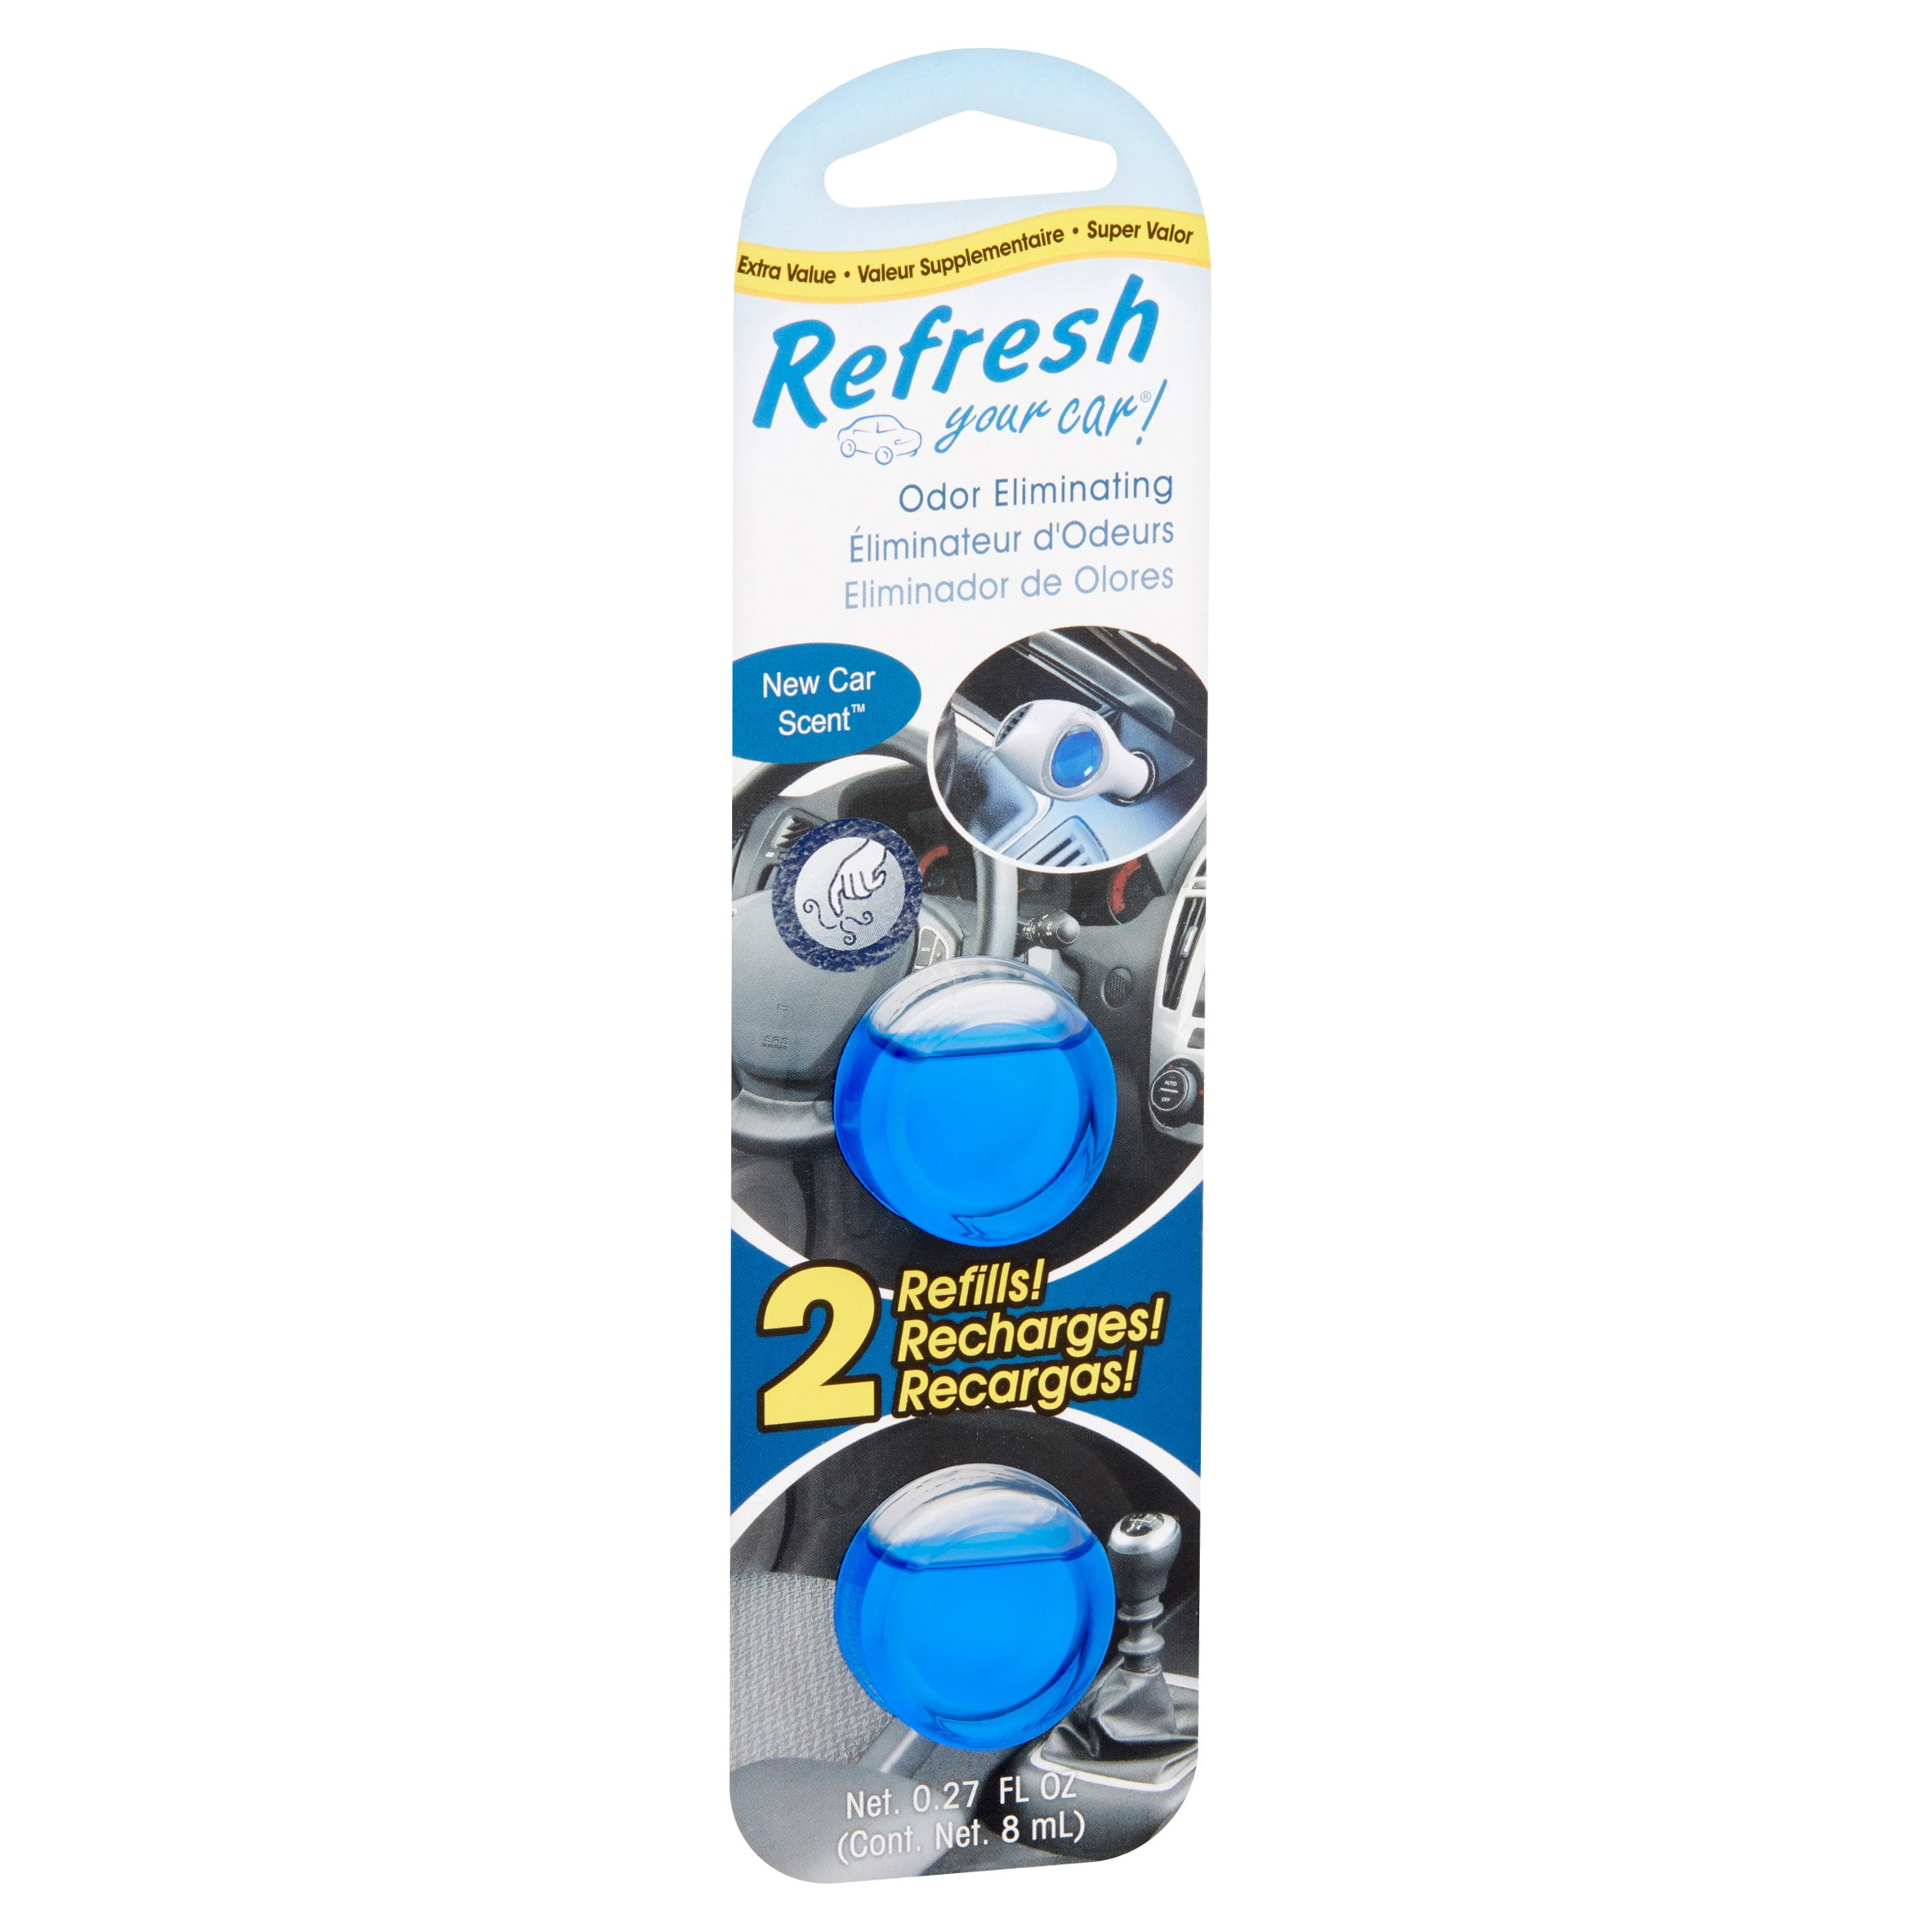 Refresh Your Car! New Car Scent Air Freshener Refill, 0.27 Fl. Oz., 2 Count  